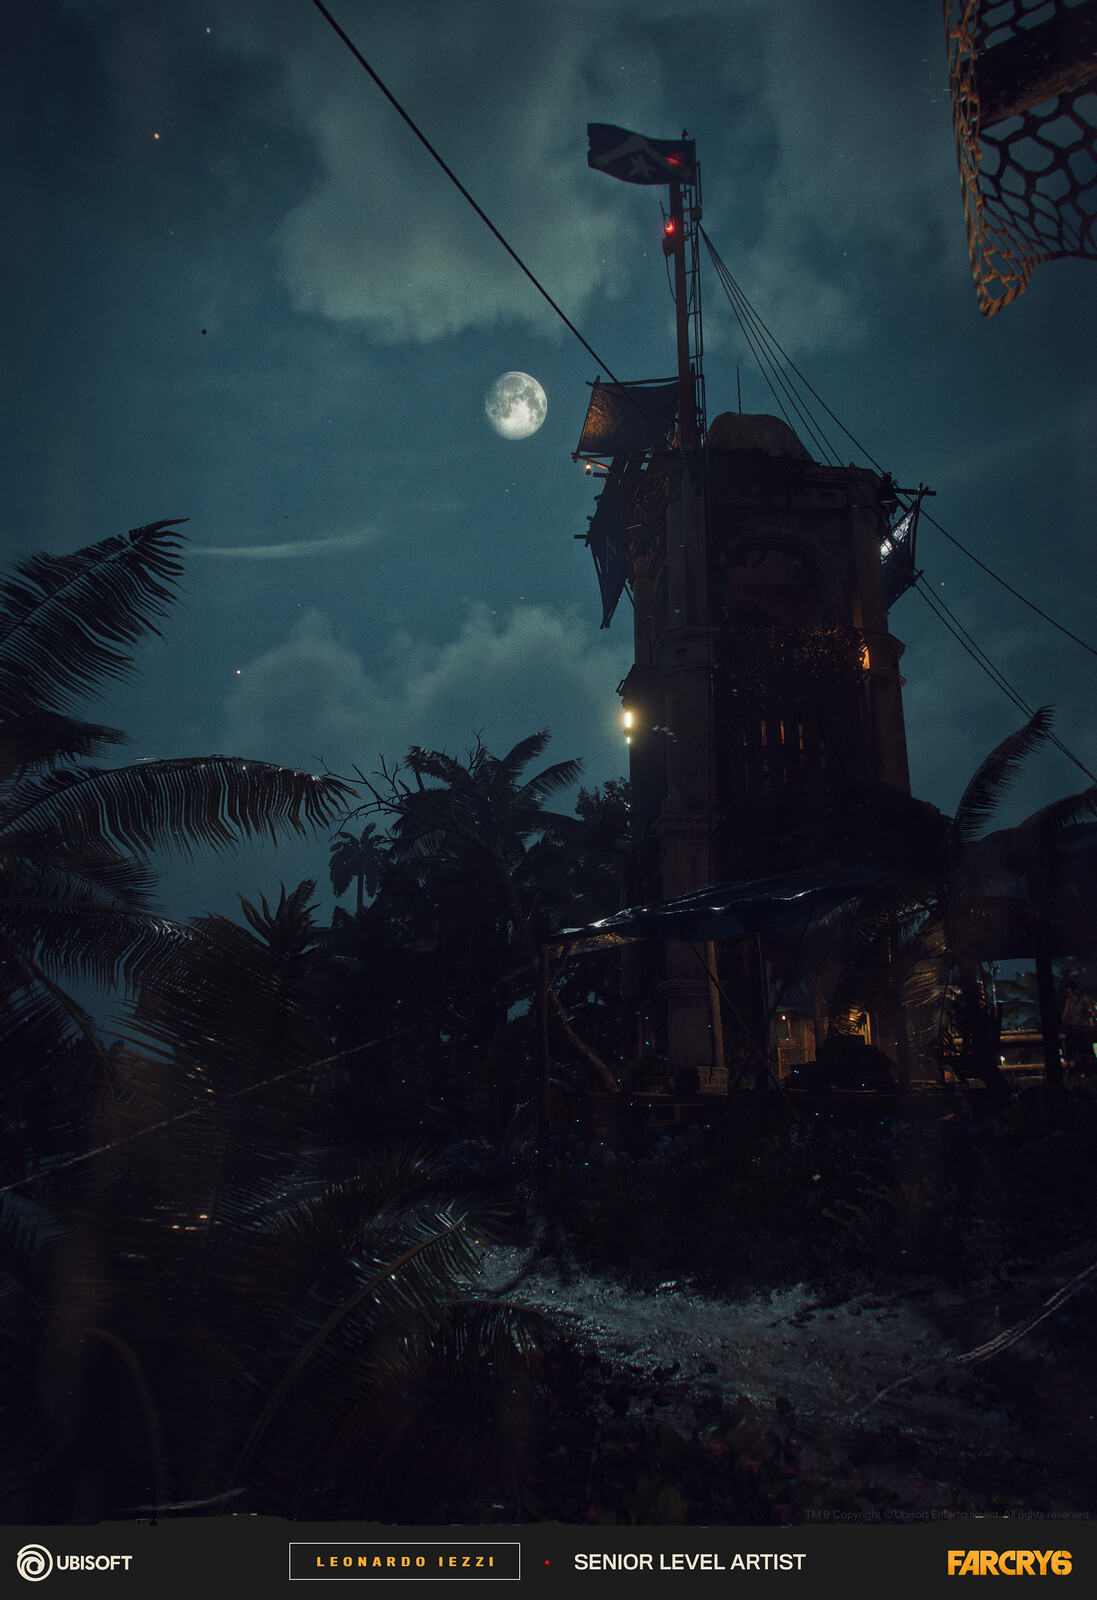 Lookout tower on Libertad island at night